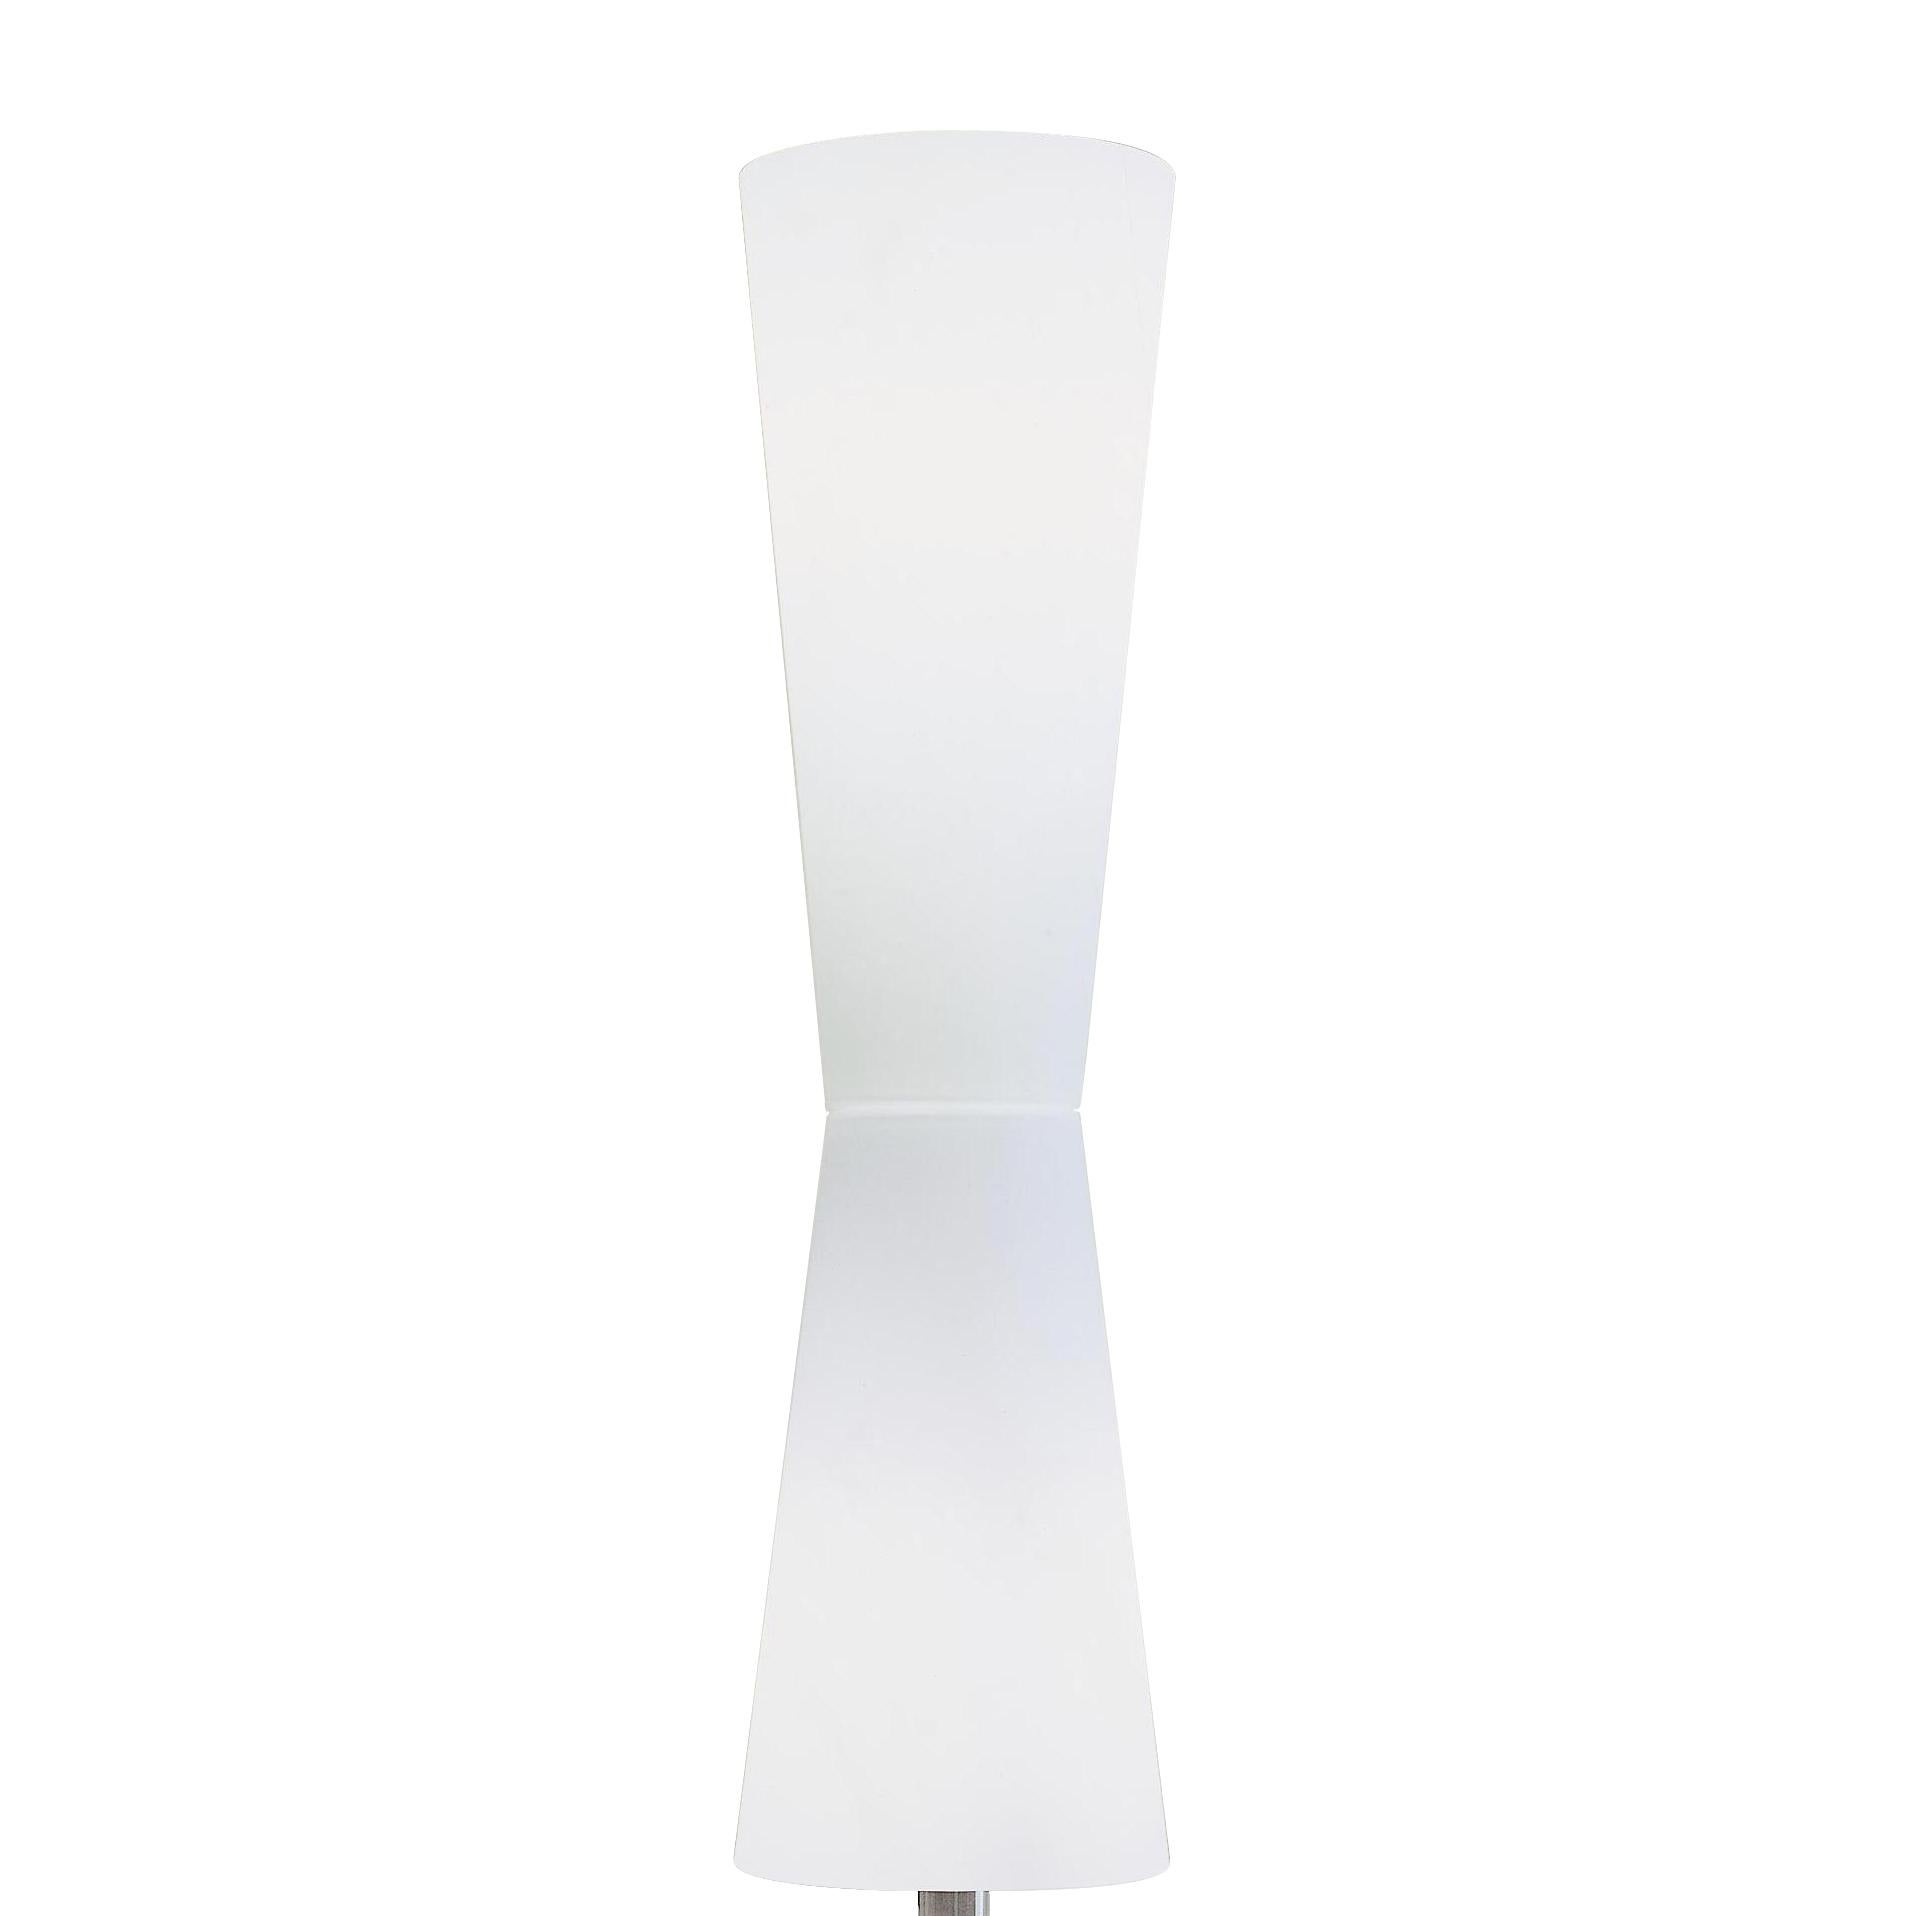 Floor lamp 'Lu-Lu' designed by Stefano Casciani in 1996.
Floor lamp with Murano glass diffuser and brushed metal base.Manufactured by Oluce, Italy.

The geometries chosen by Stefano Casciani when designing the Lu-Lu lamp are Primitive, light,